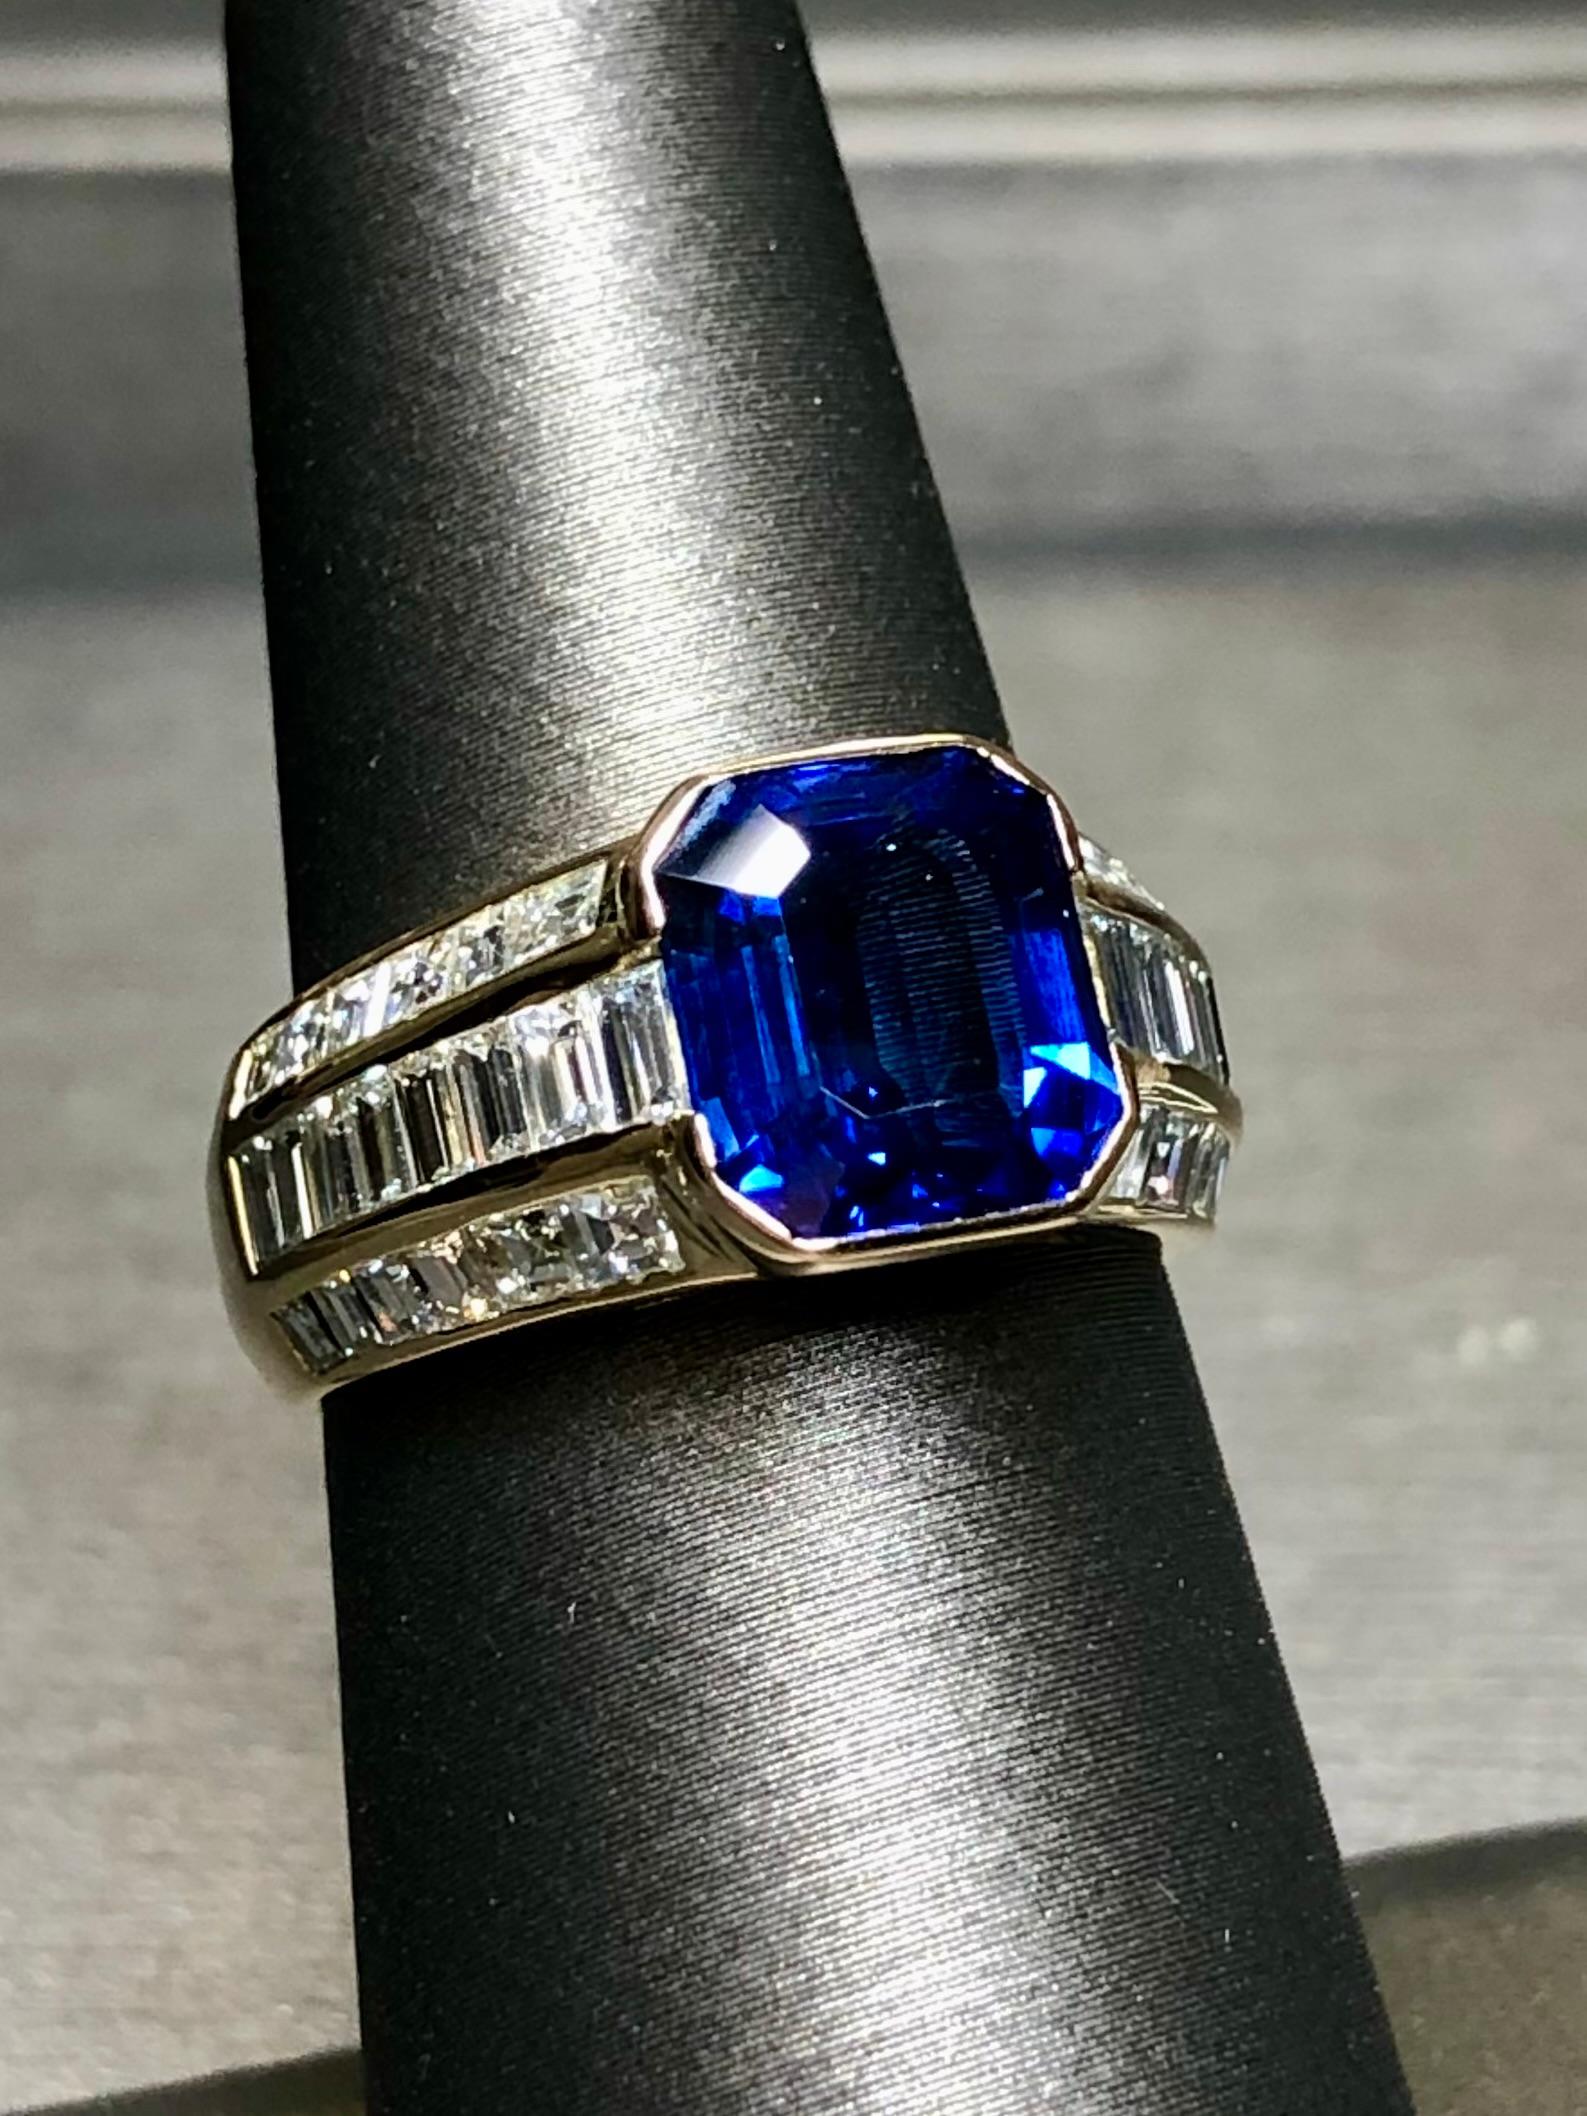 
A brilliant ring holding a brilliant stone. This ring is done in 18K yellow gold holding and approximately 3.90ct emerald cut sapphire exhibiting beautiful color and completely loupe clean of inclusions. The ring itself has been channel set with